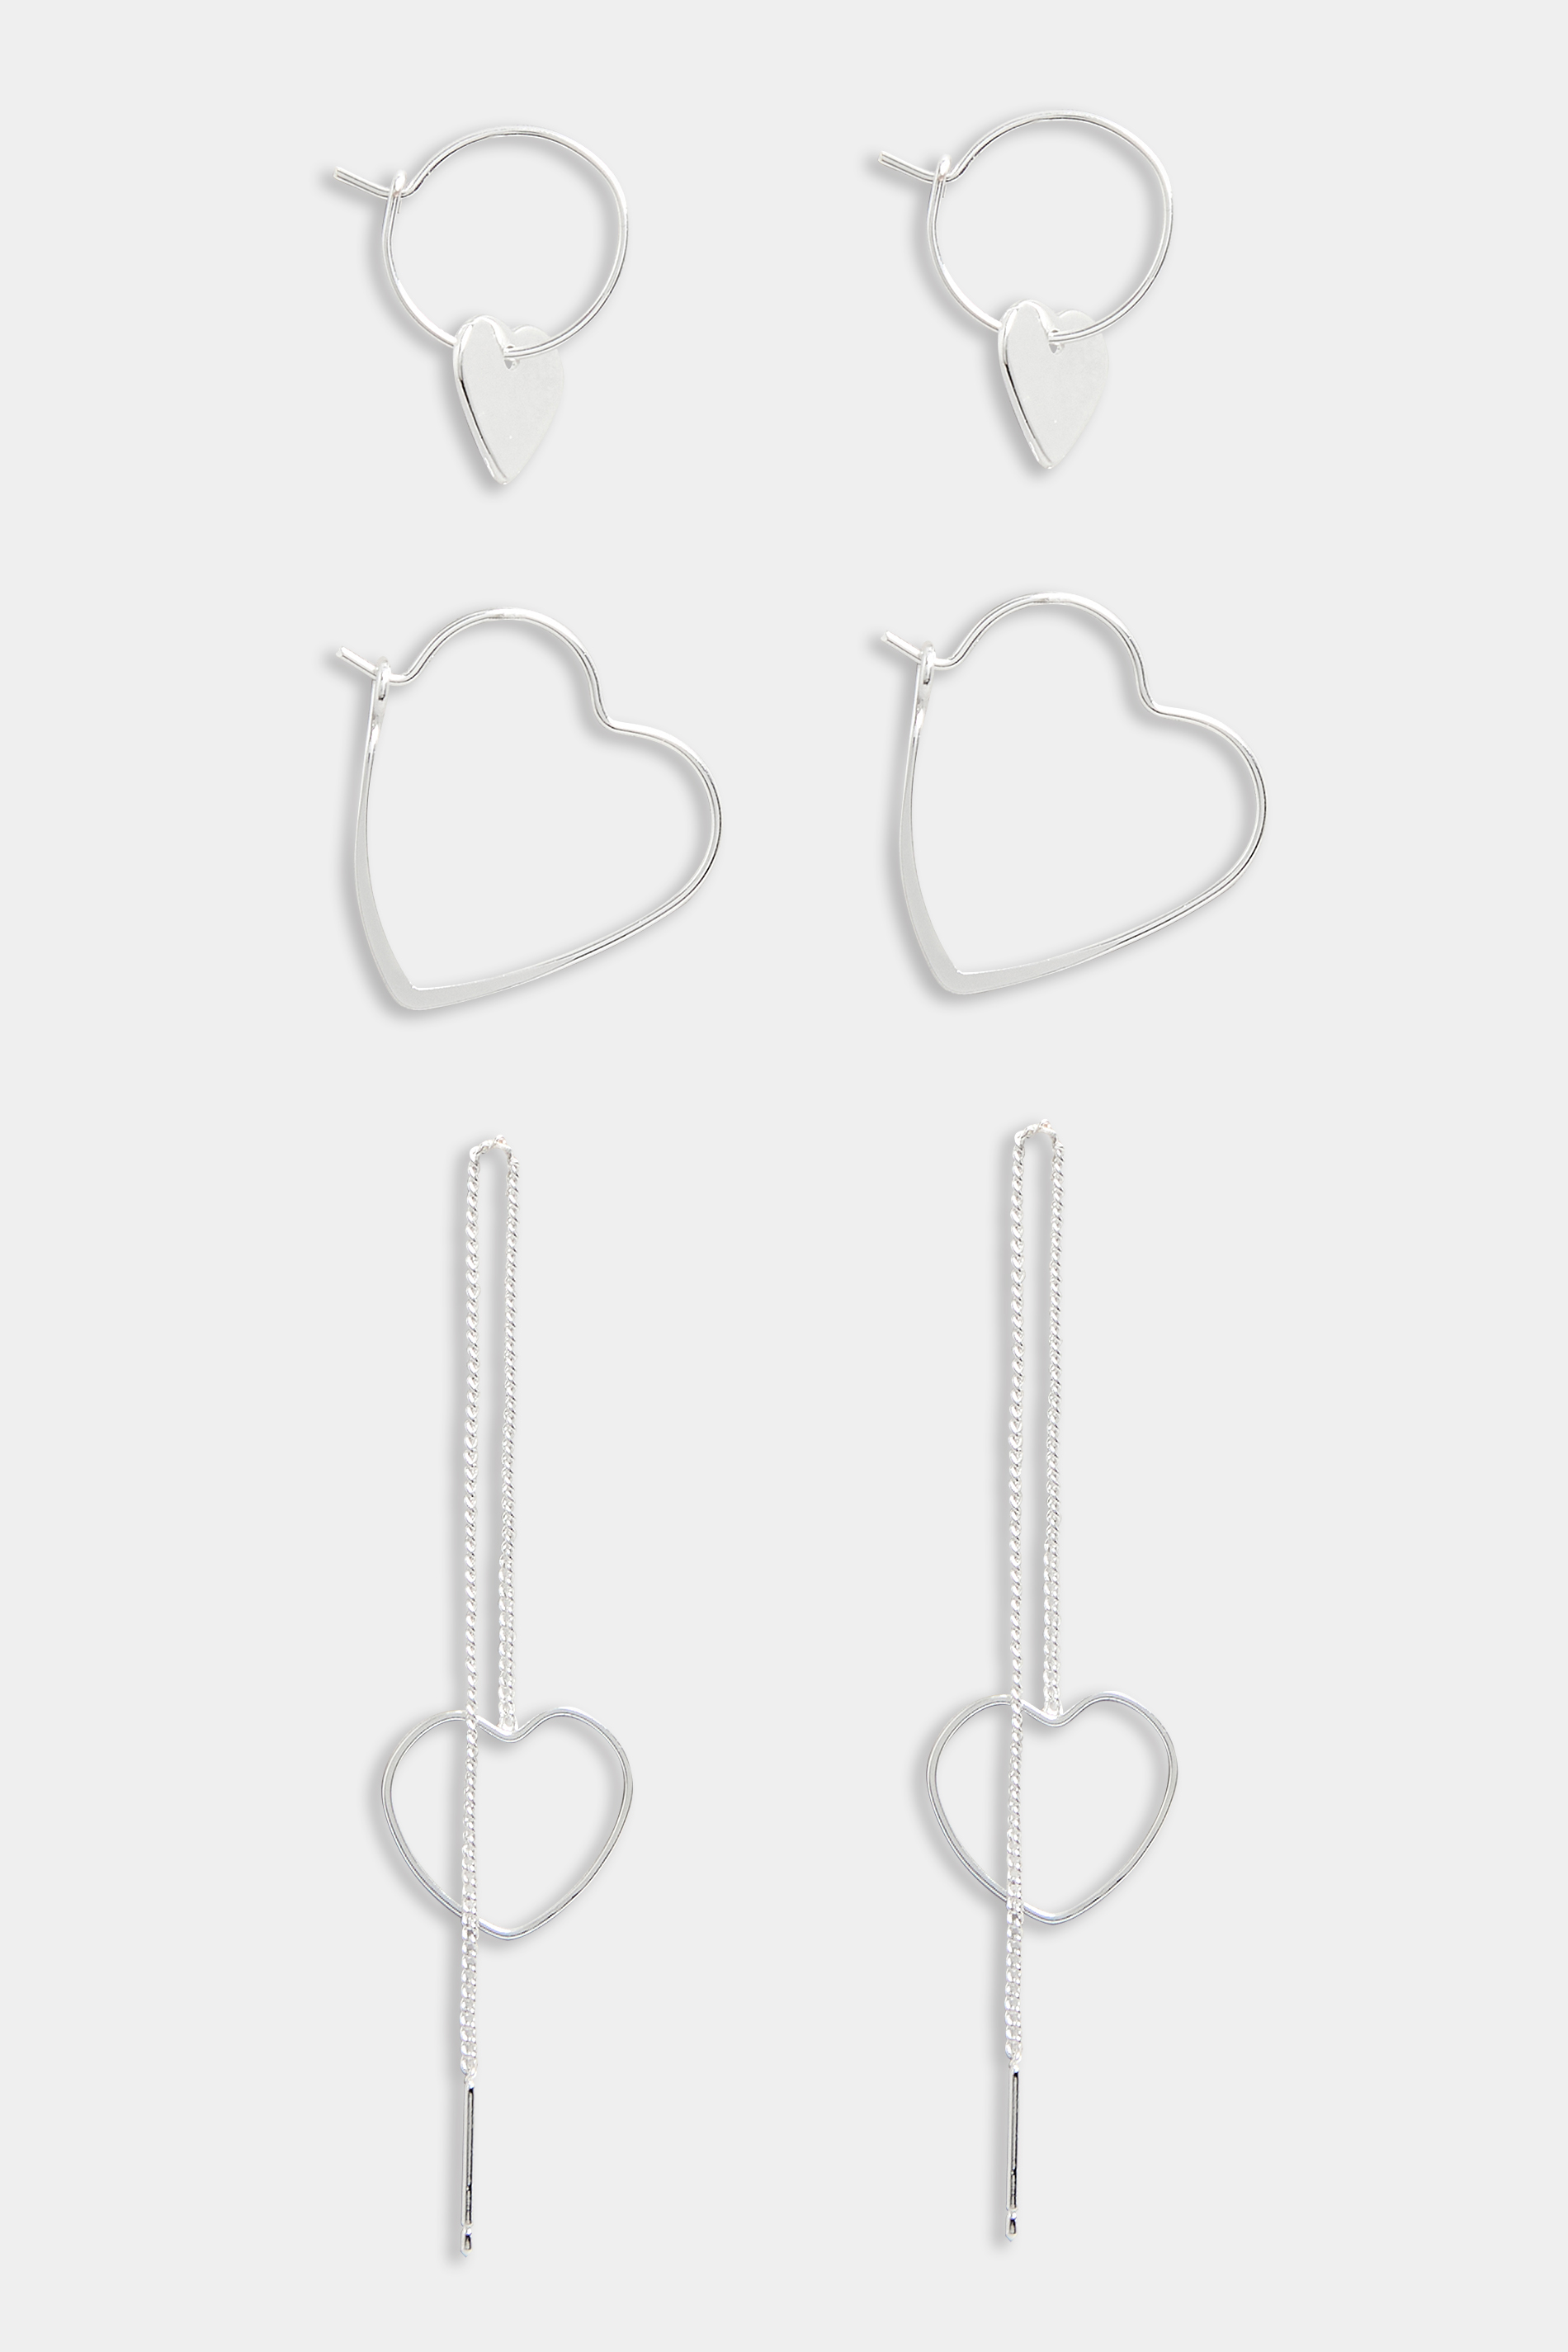 3 PACK Silver Heart Multi Earrings | Yours Clothing 2